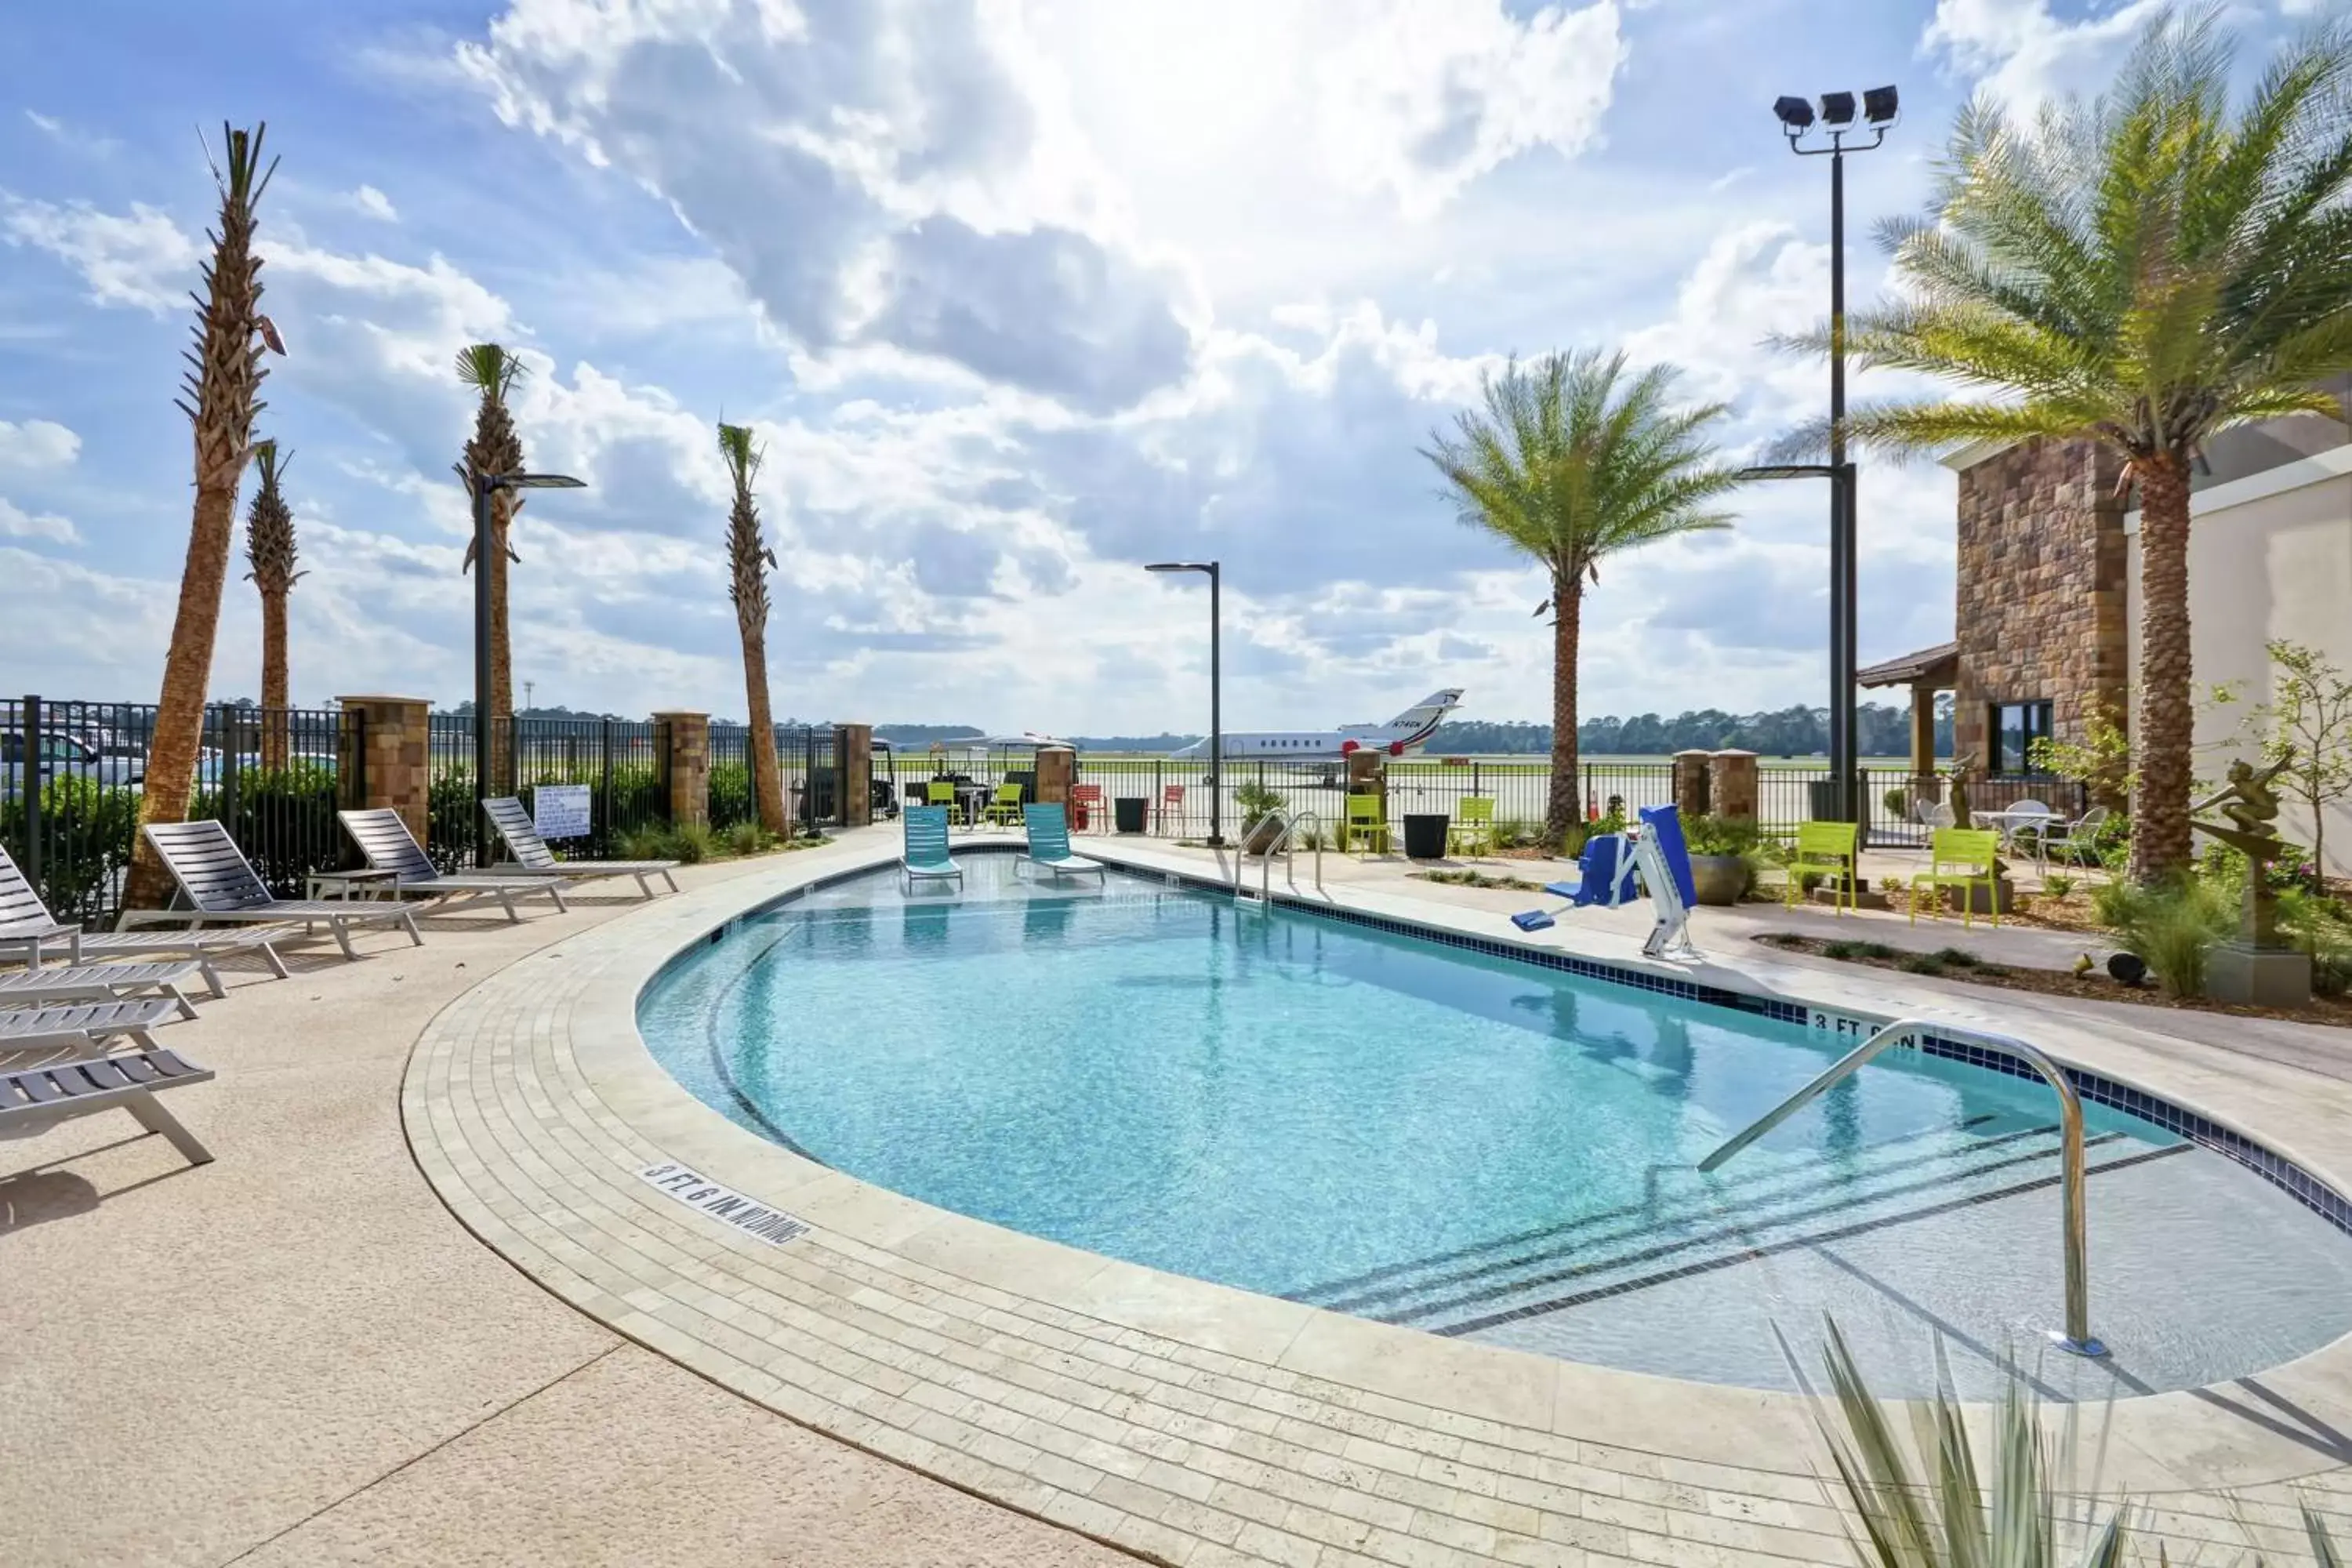 Swimming Pool in Home2 Suites By Hilton St. Simons Island